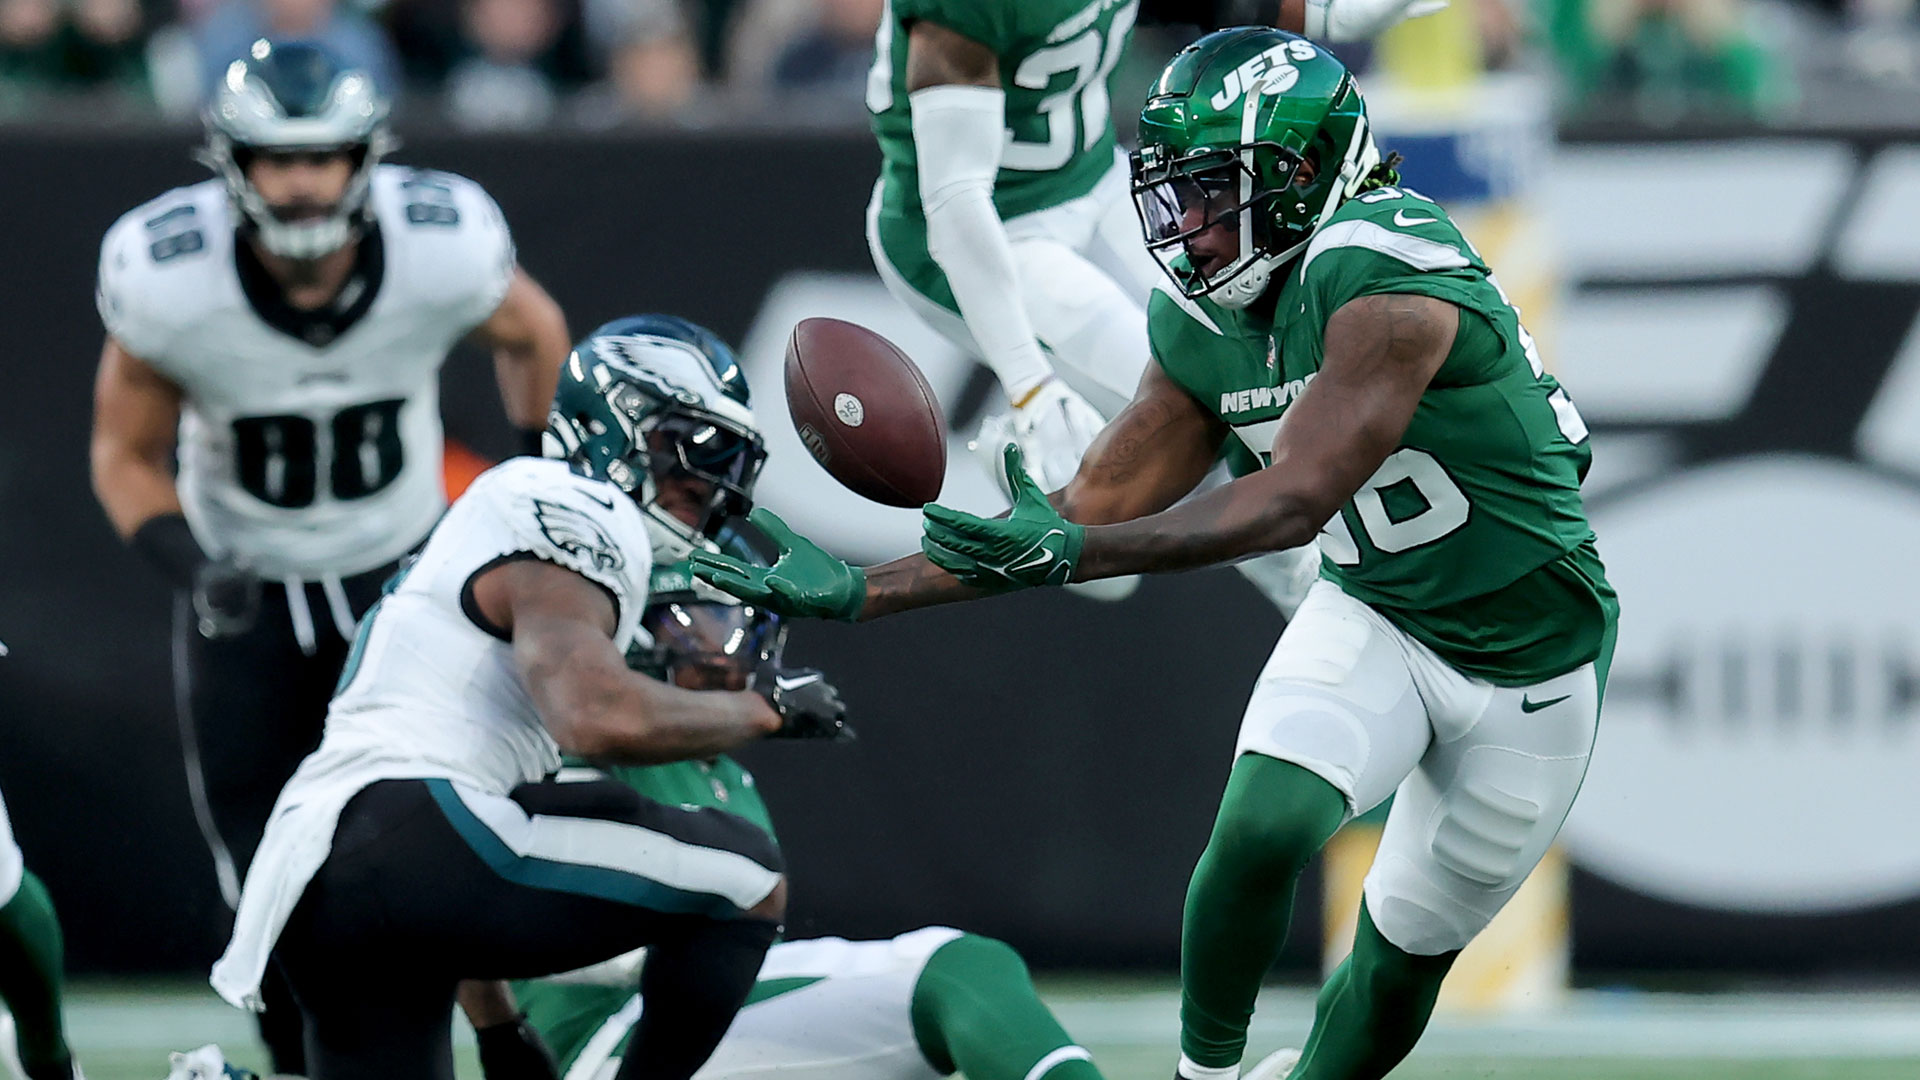 Eagles vs. Jets: 5 stats to know from shocking 20-14 loss in Week 6